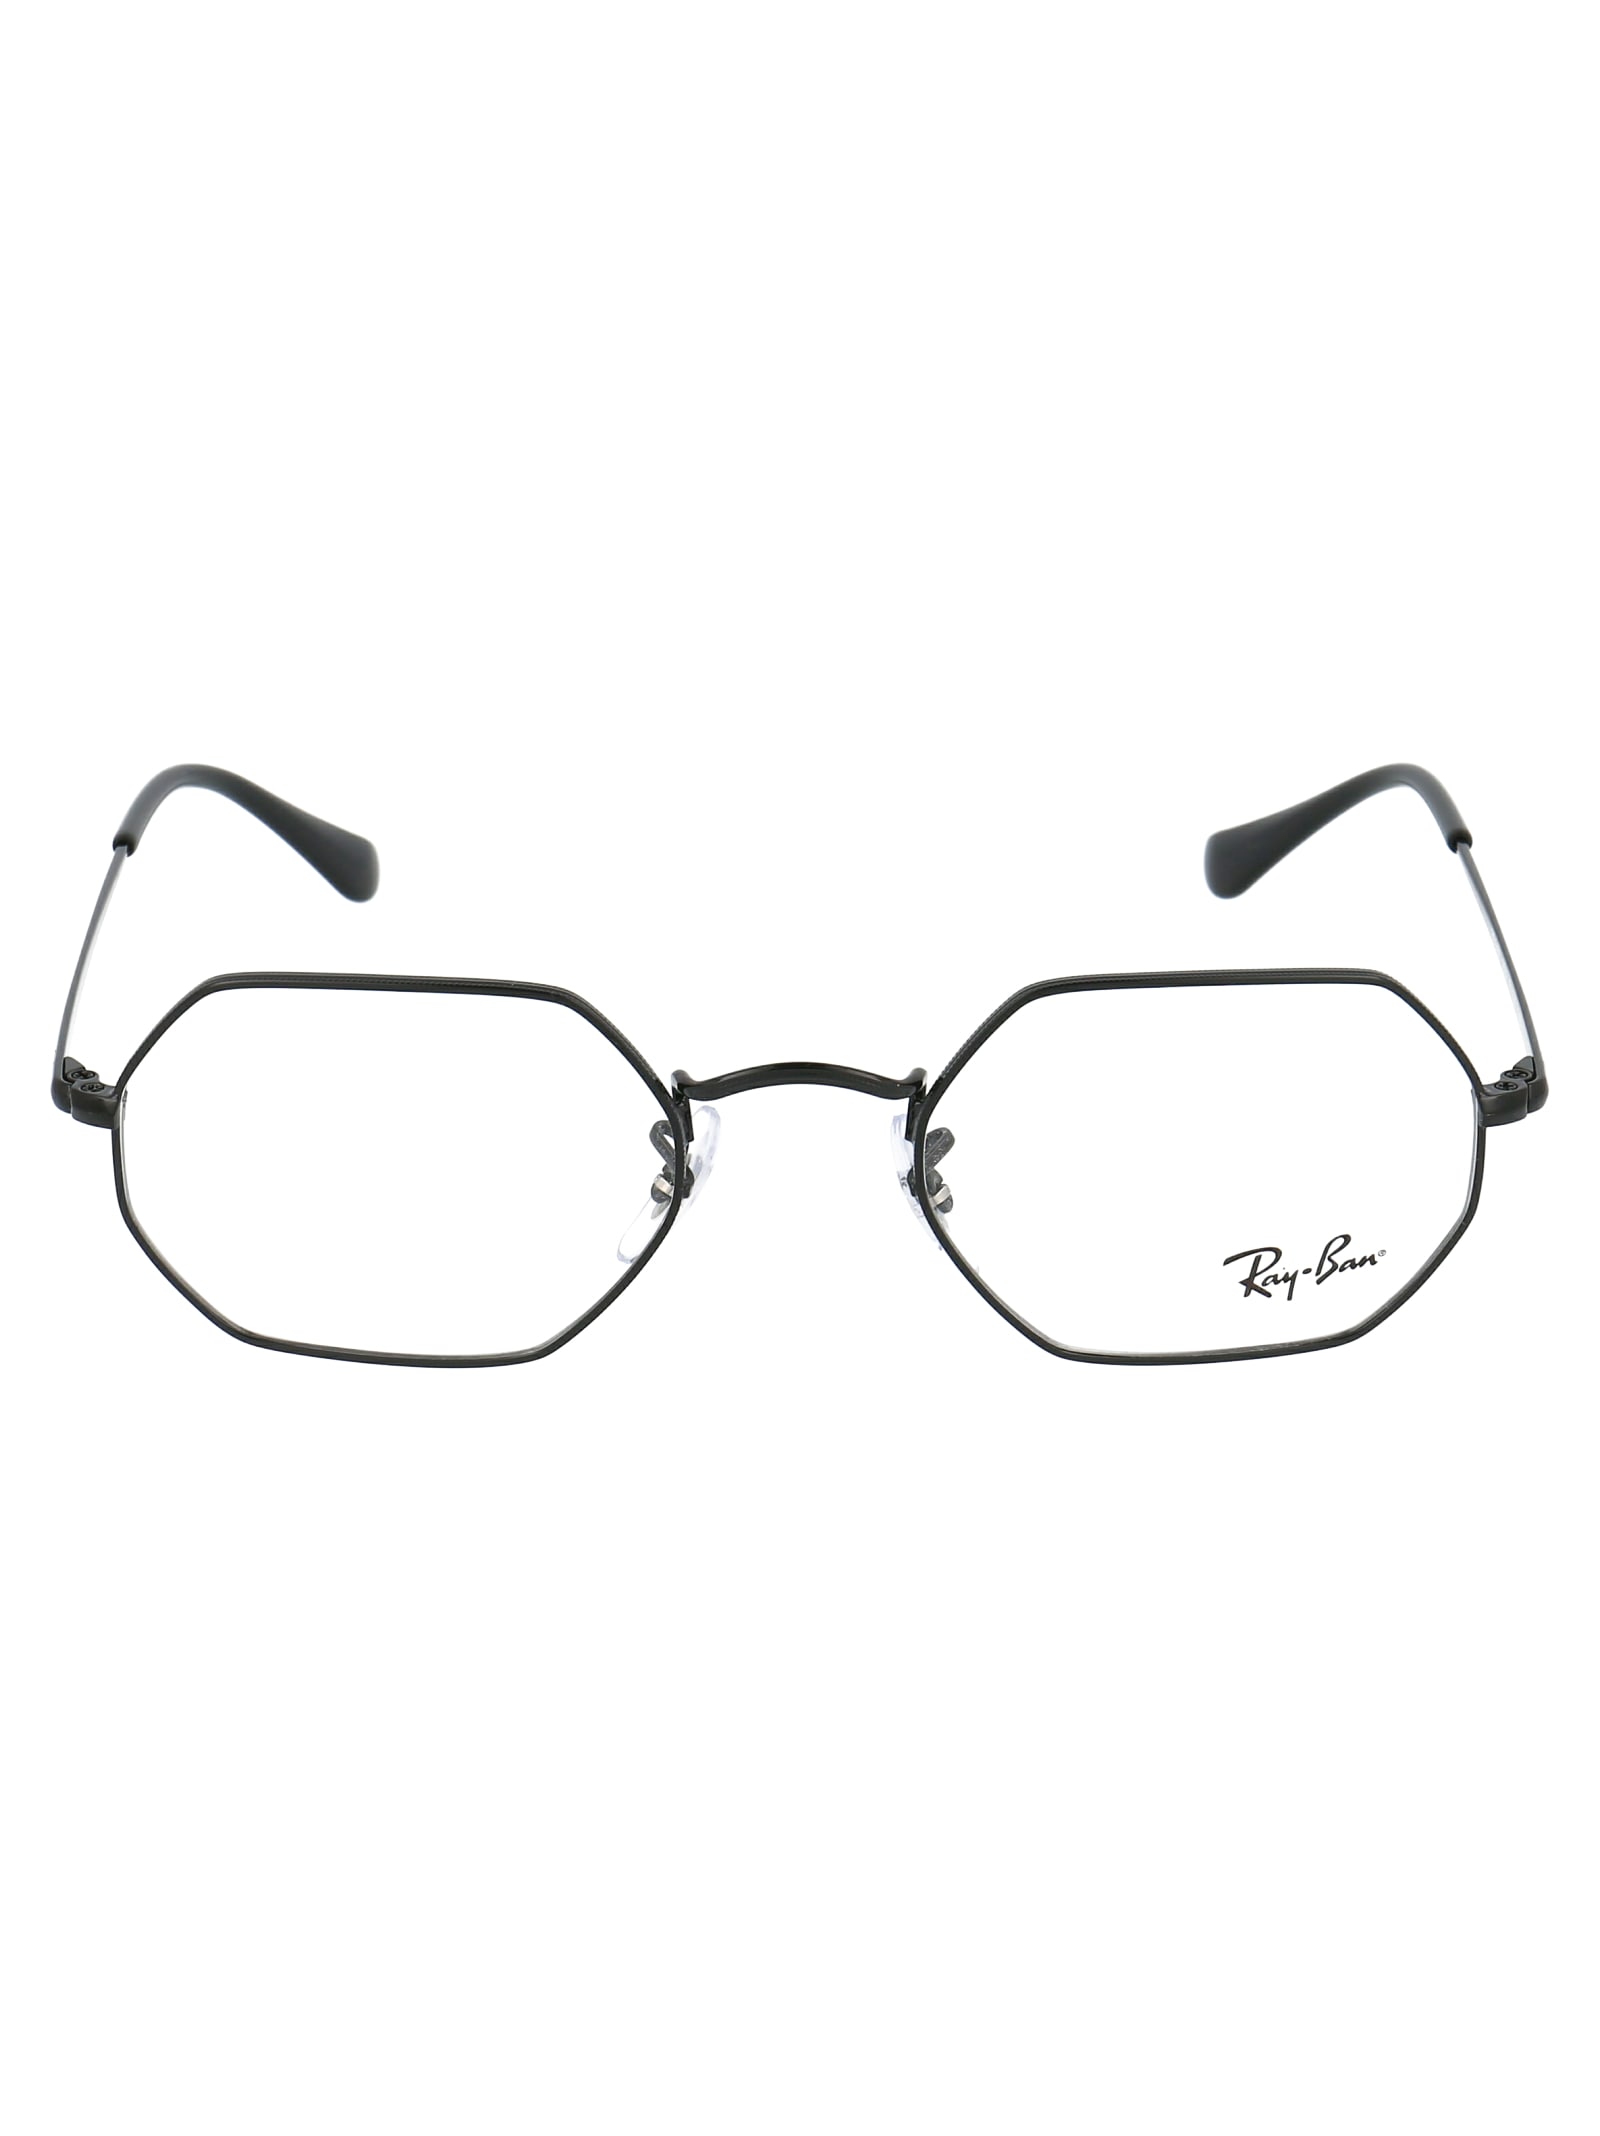 Ray Ban 0rx6456 Glasses In 2509 Black